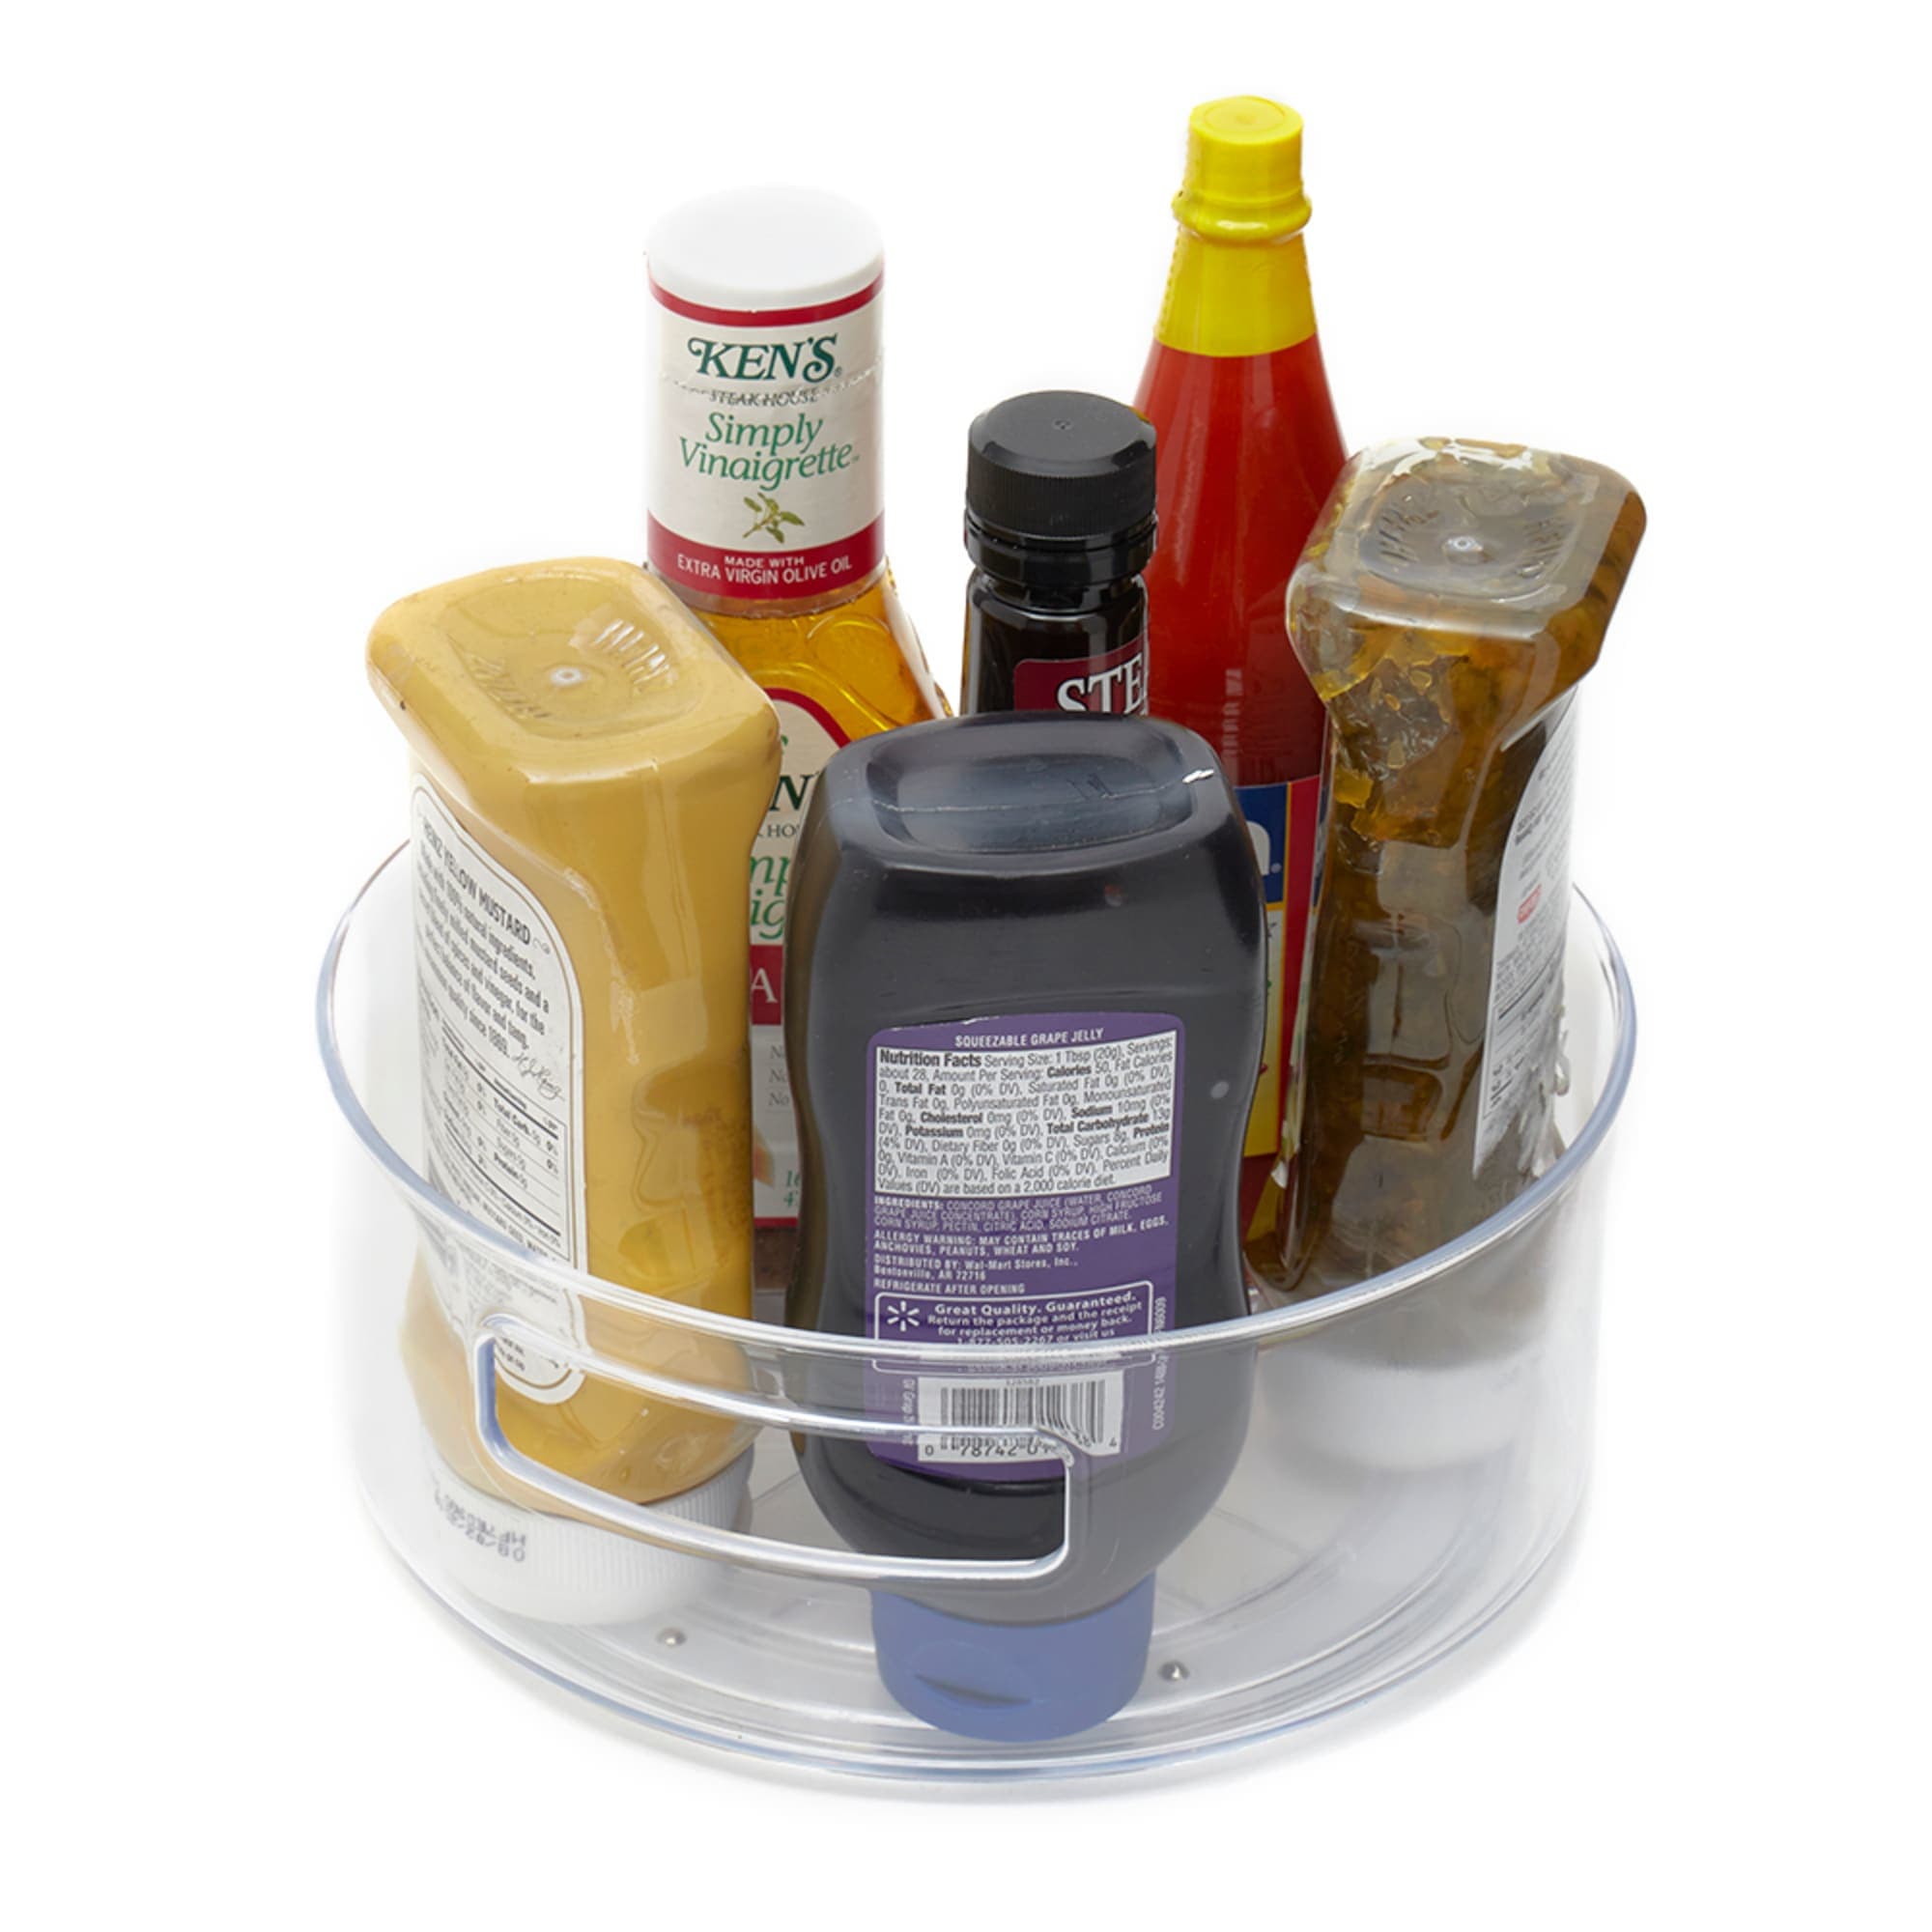 Home Basics Clear Plastic Lazy Susan $4.00 EACH, CASE PACK OF 12